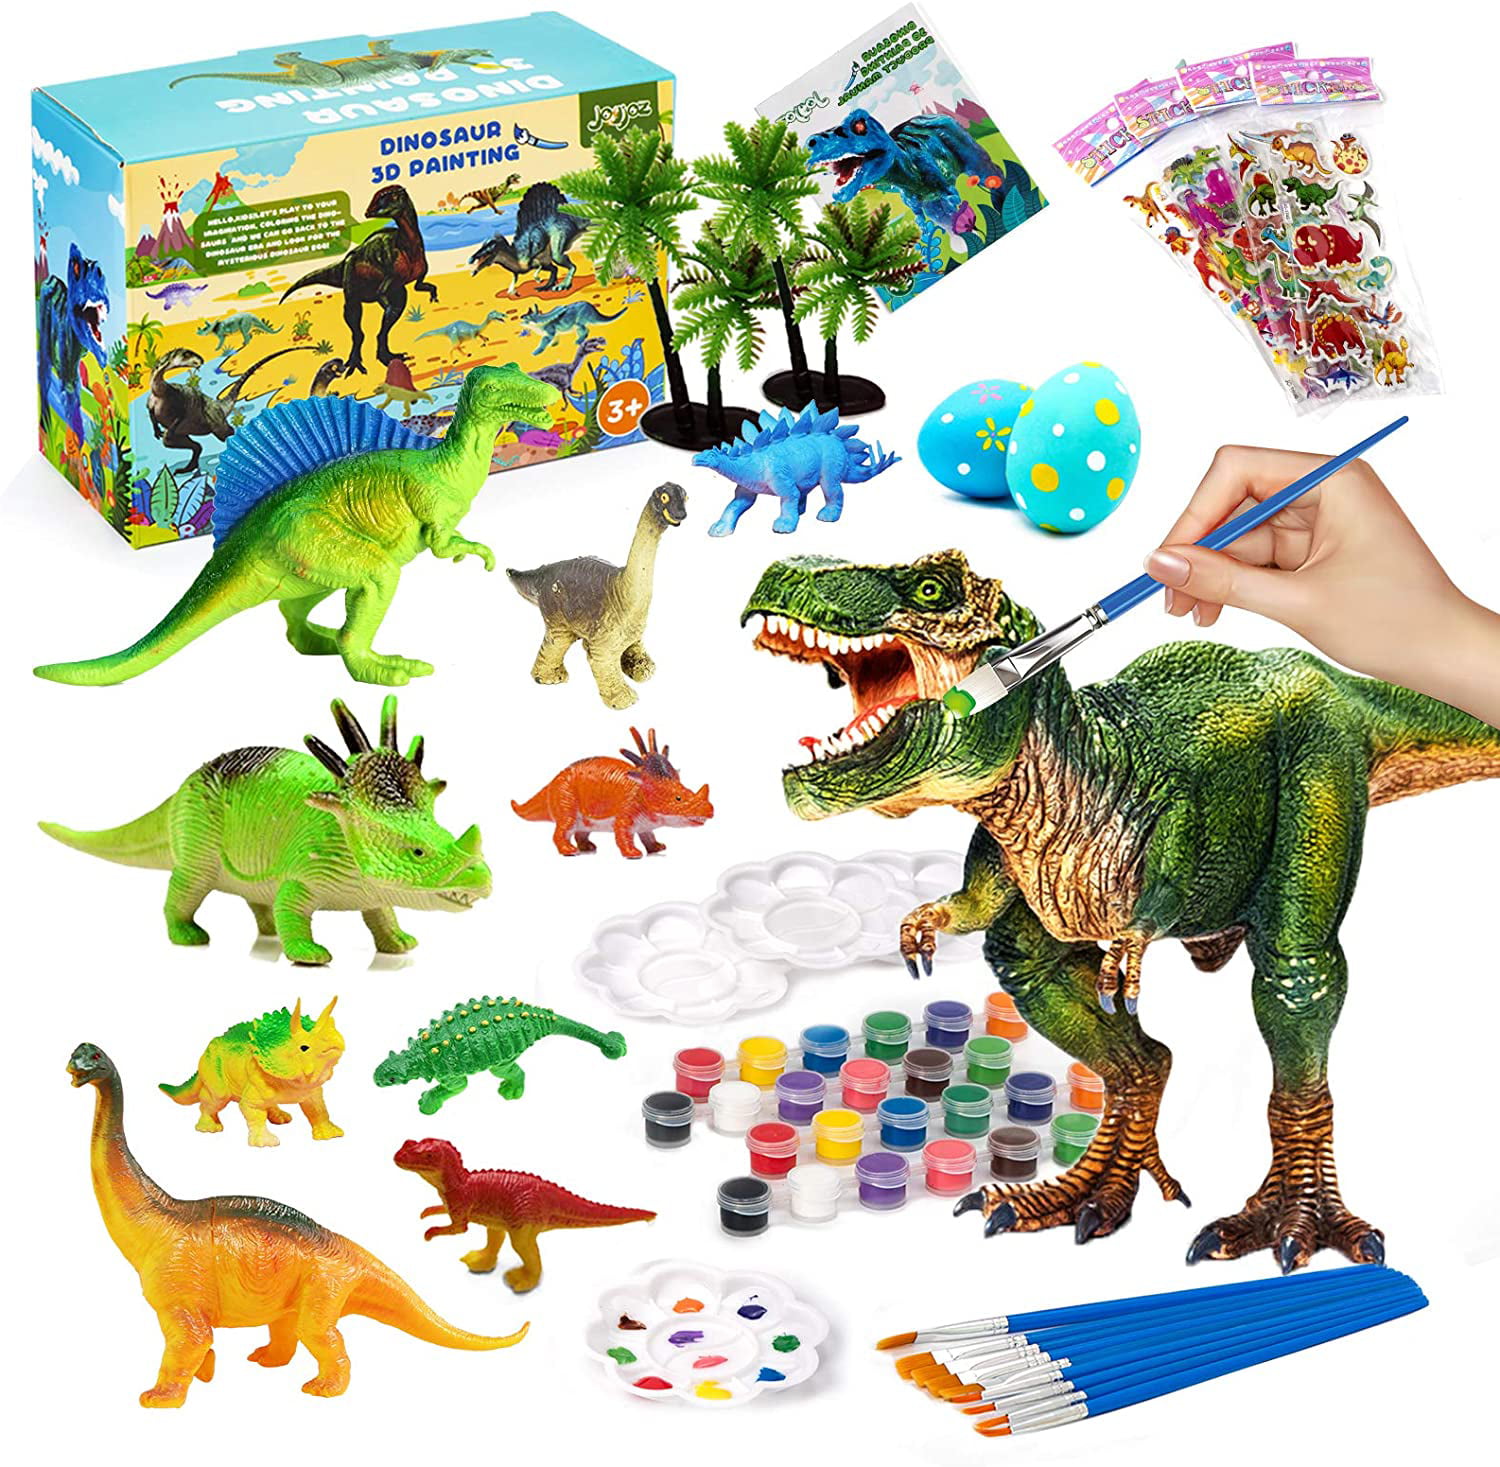 Art Supplies for Kids Paint Your Own Dinosaur Creativity DIY 3D Painting Dinosaurs Toys Arts and Crafts for Boys Girls Age 3,4,5,6,7,8 Years Old Big Size Dinosaur Painting Kit for Kids Crafts